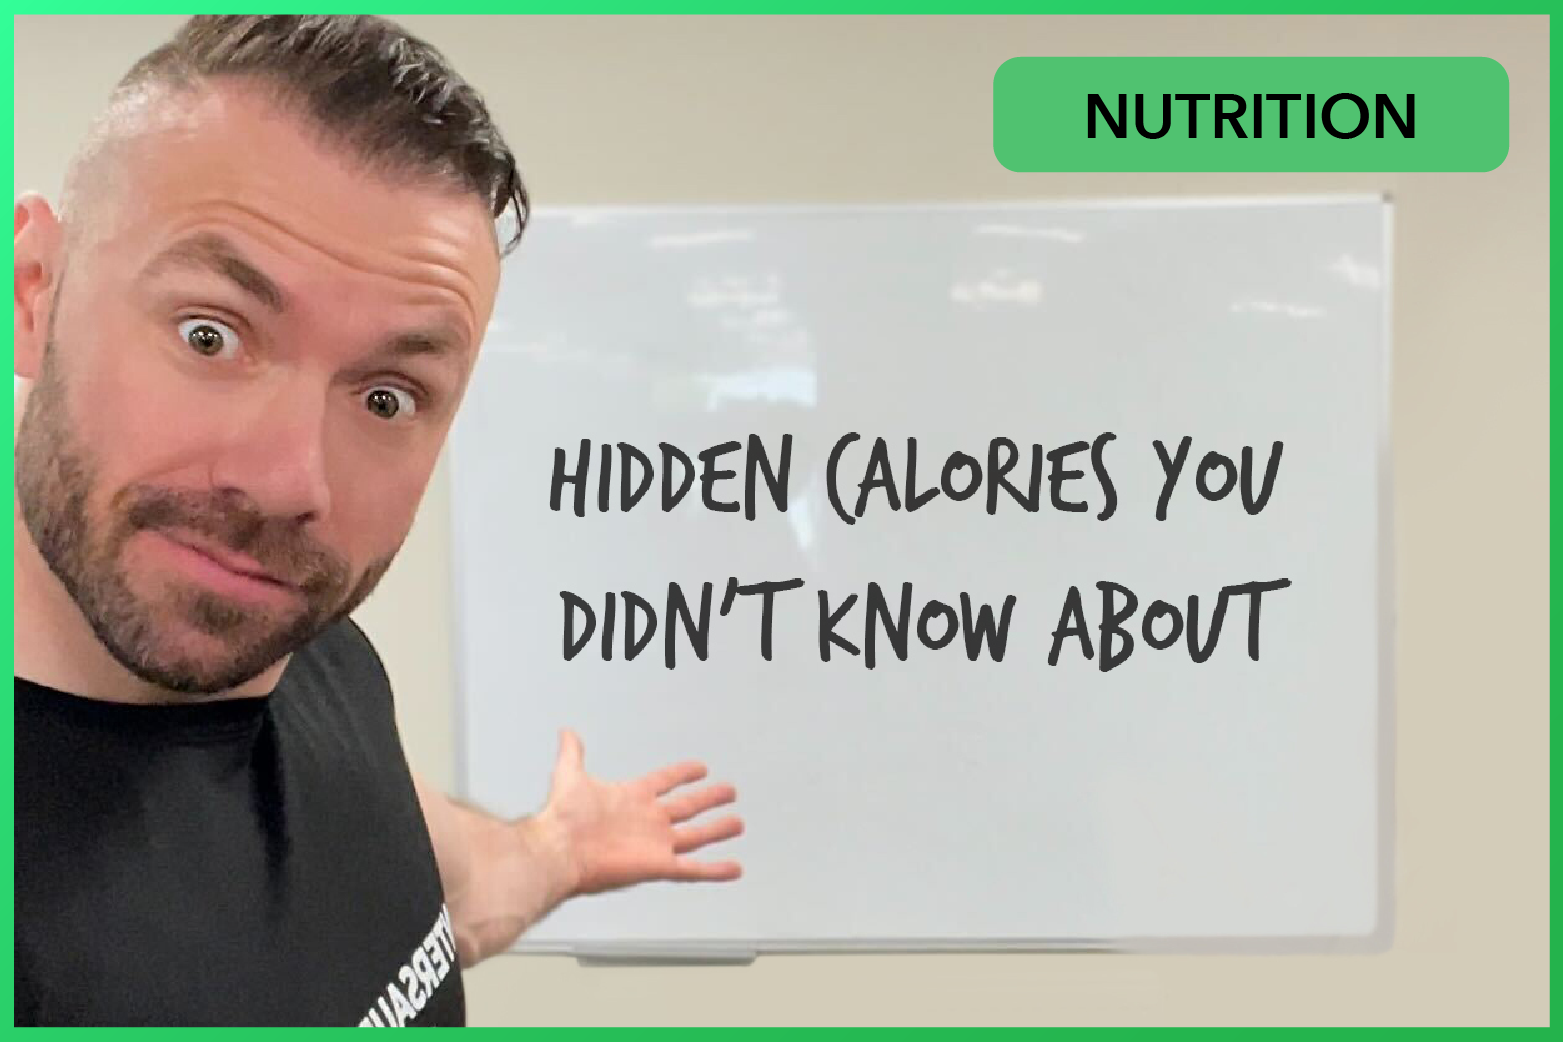 _Hidden calories are slowing your weight loss-73.png